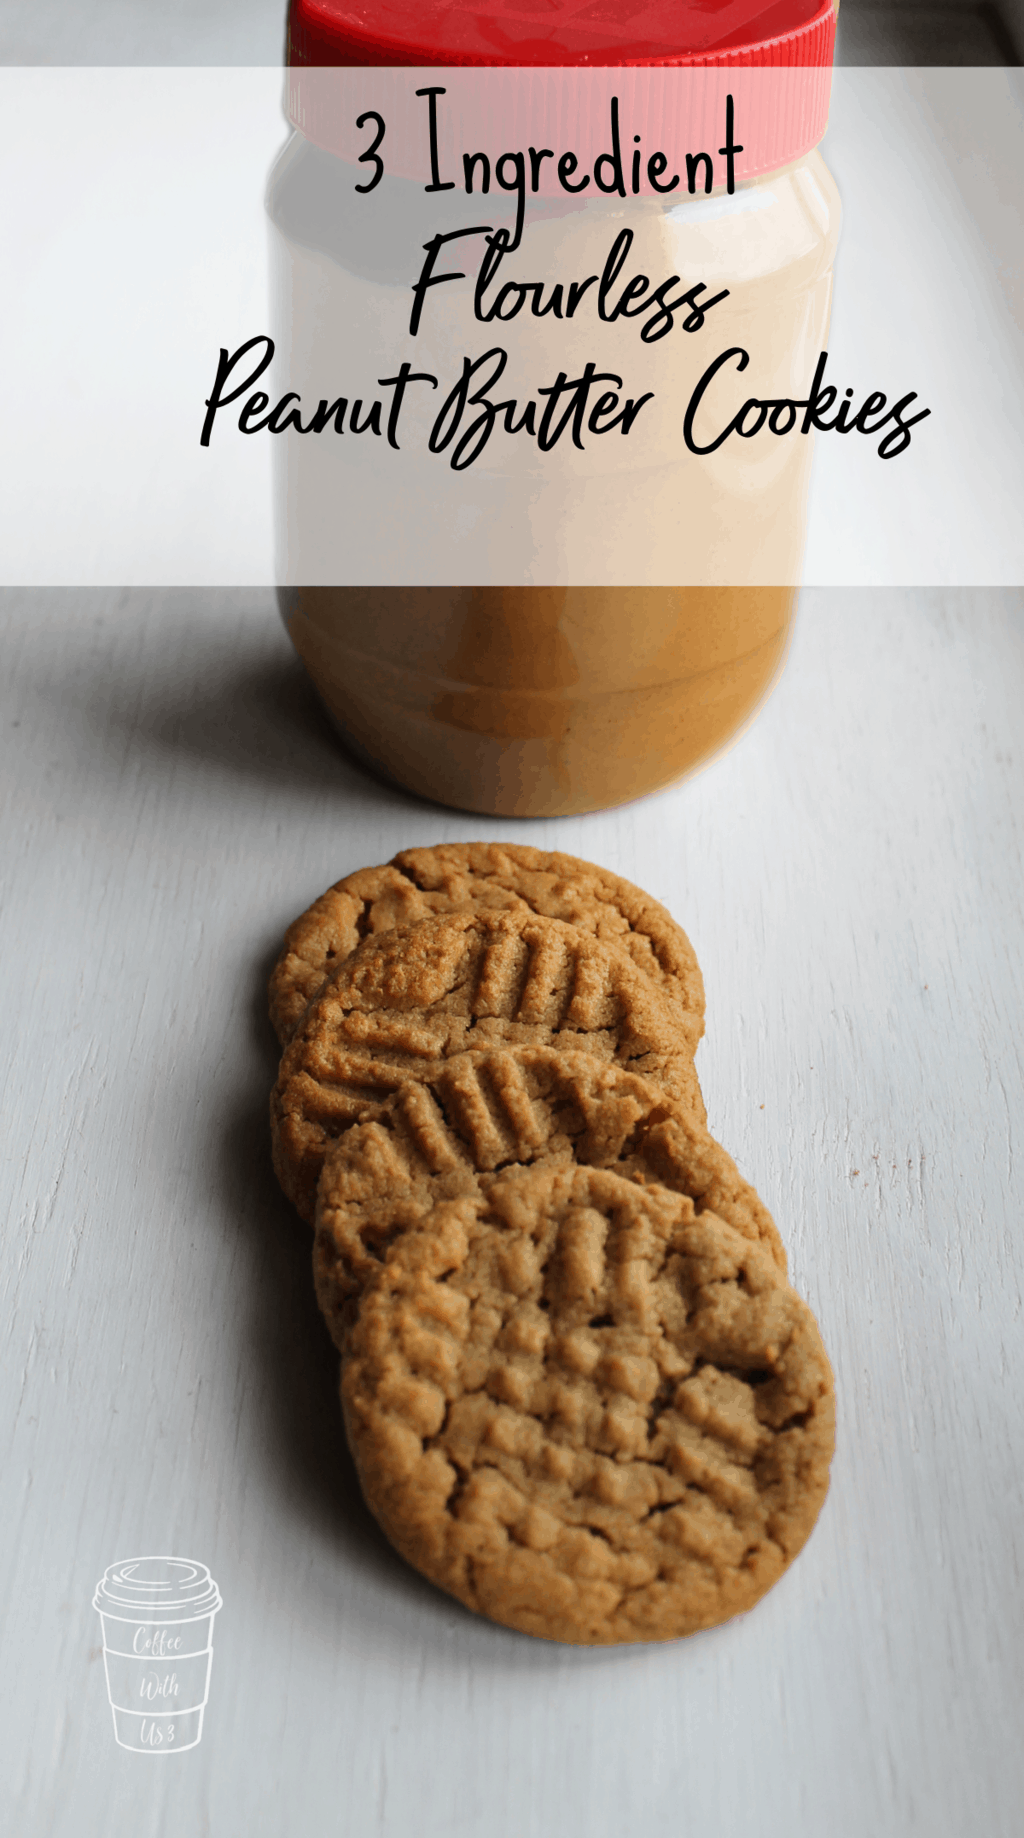 A stack of Flourless Peanut Butter Cookies in front of a jar of peanut butter